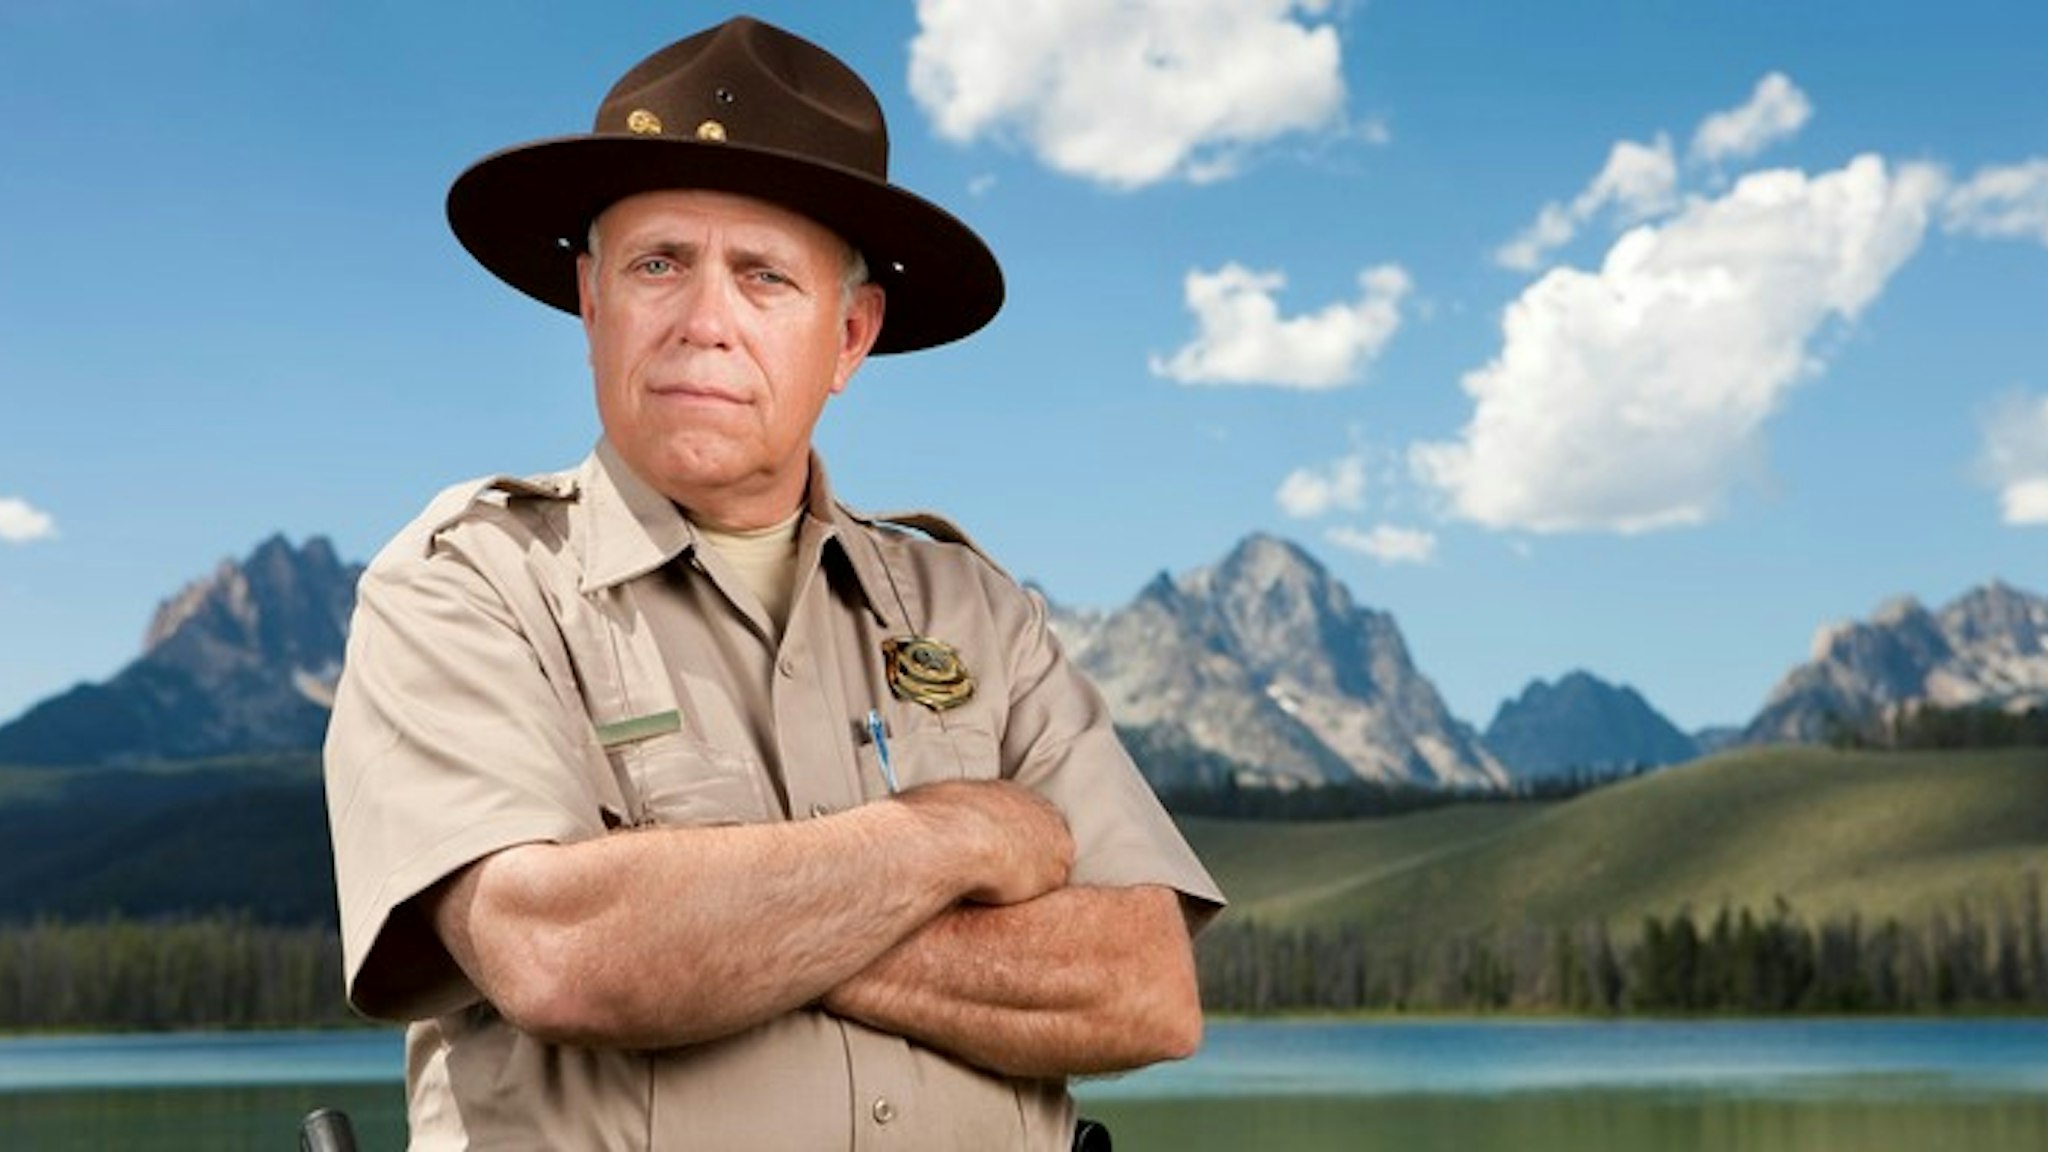 A mature male park ranger (or police officer) standing in front of a beautiful scenic backdrop of tall mountains and a mirror lake.